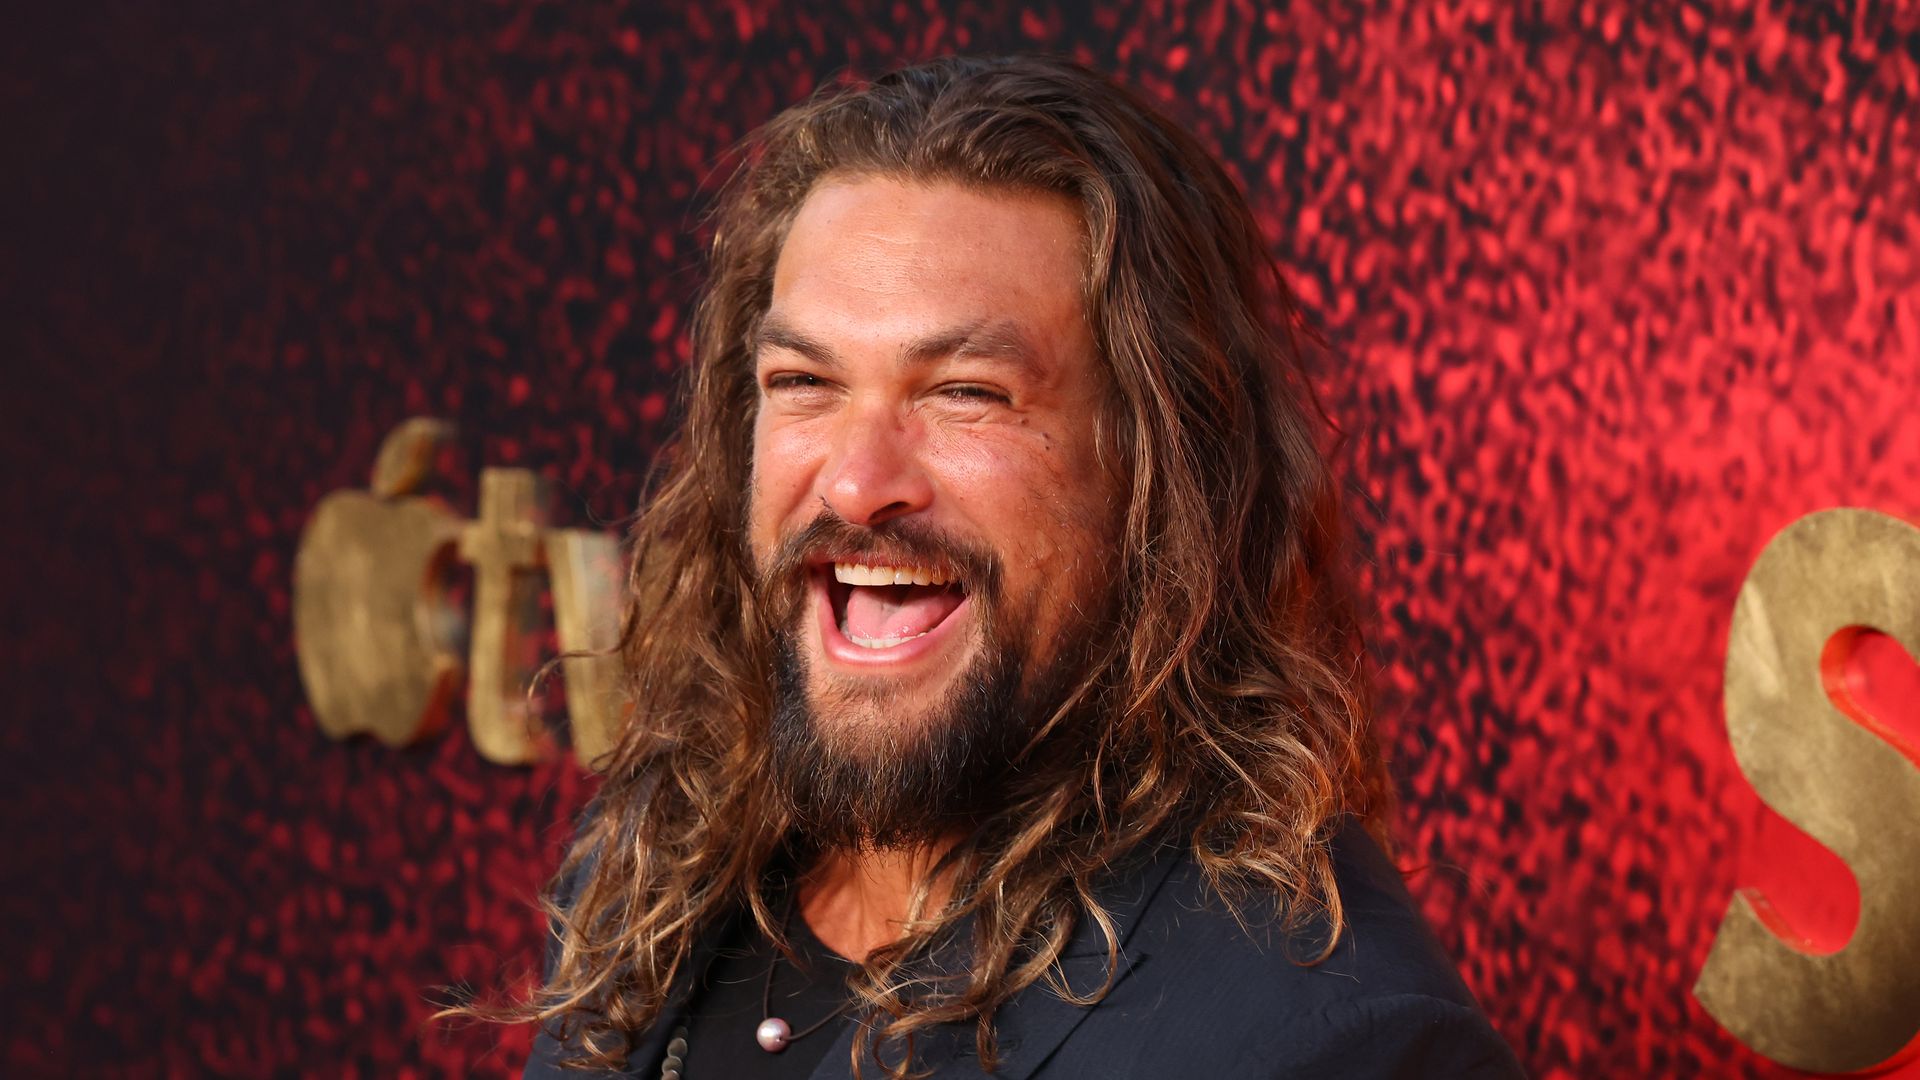 Jason Momoa attends Apple TV+ original series "See" Season 3 Los Angeles premier at DGA Theater Complex on August 23, 2022 in Los Angeles, California